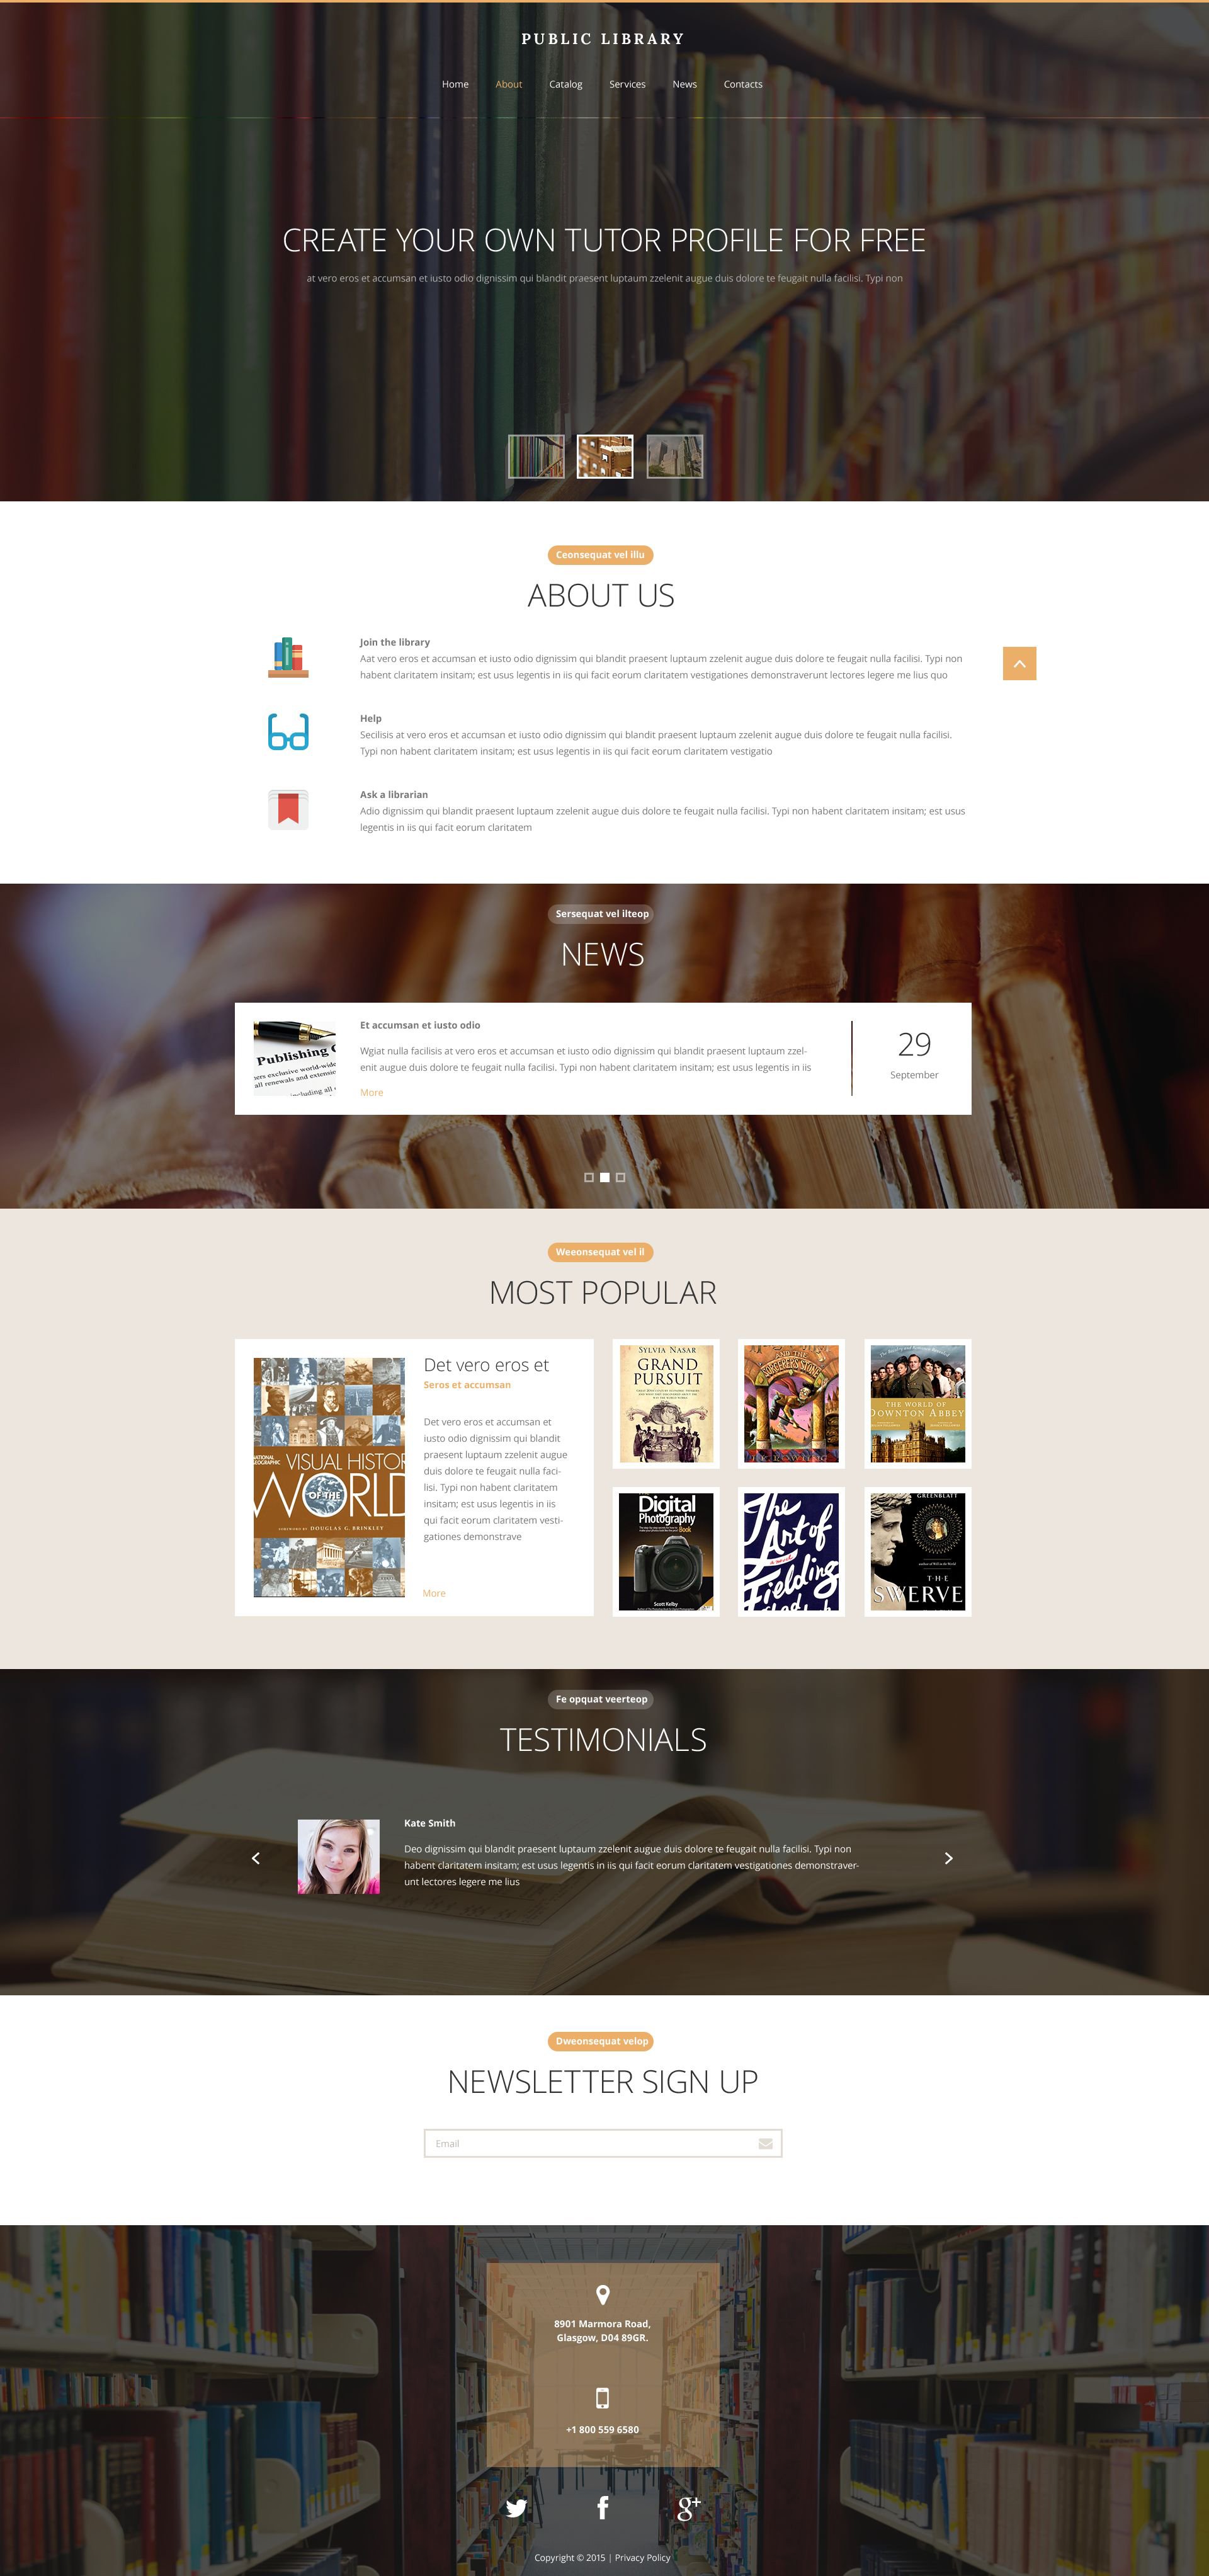 public-library-website-template